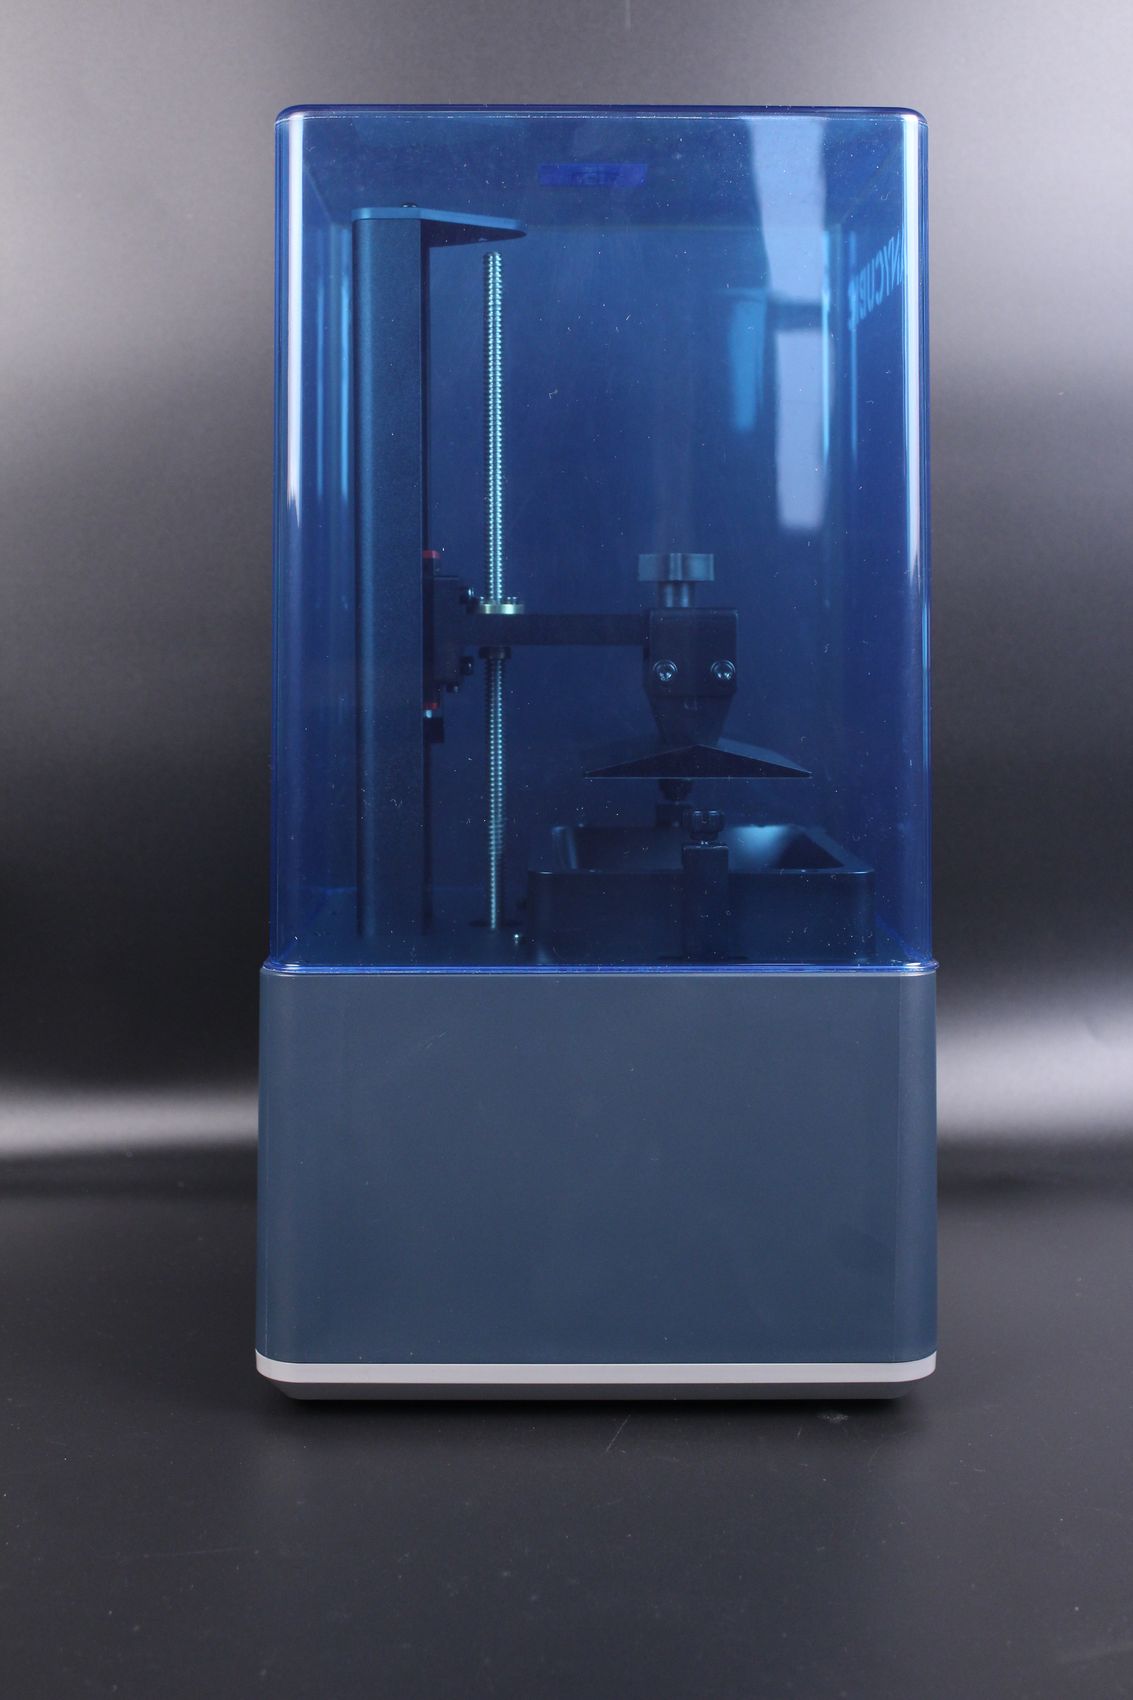 Anycubic Photon D2 Review Design4 | Anycubic Photon D2 Review: DLP Resin 3D Printer